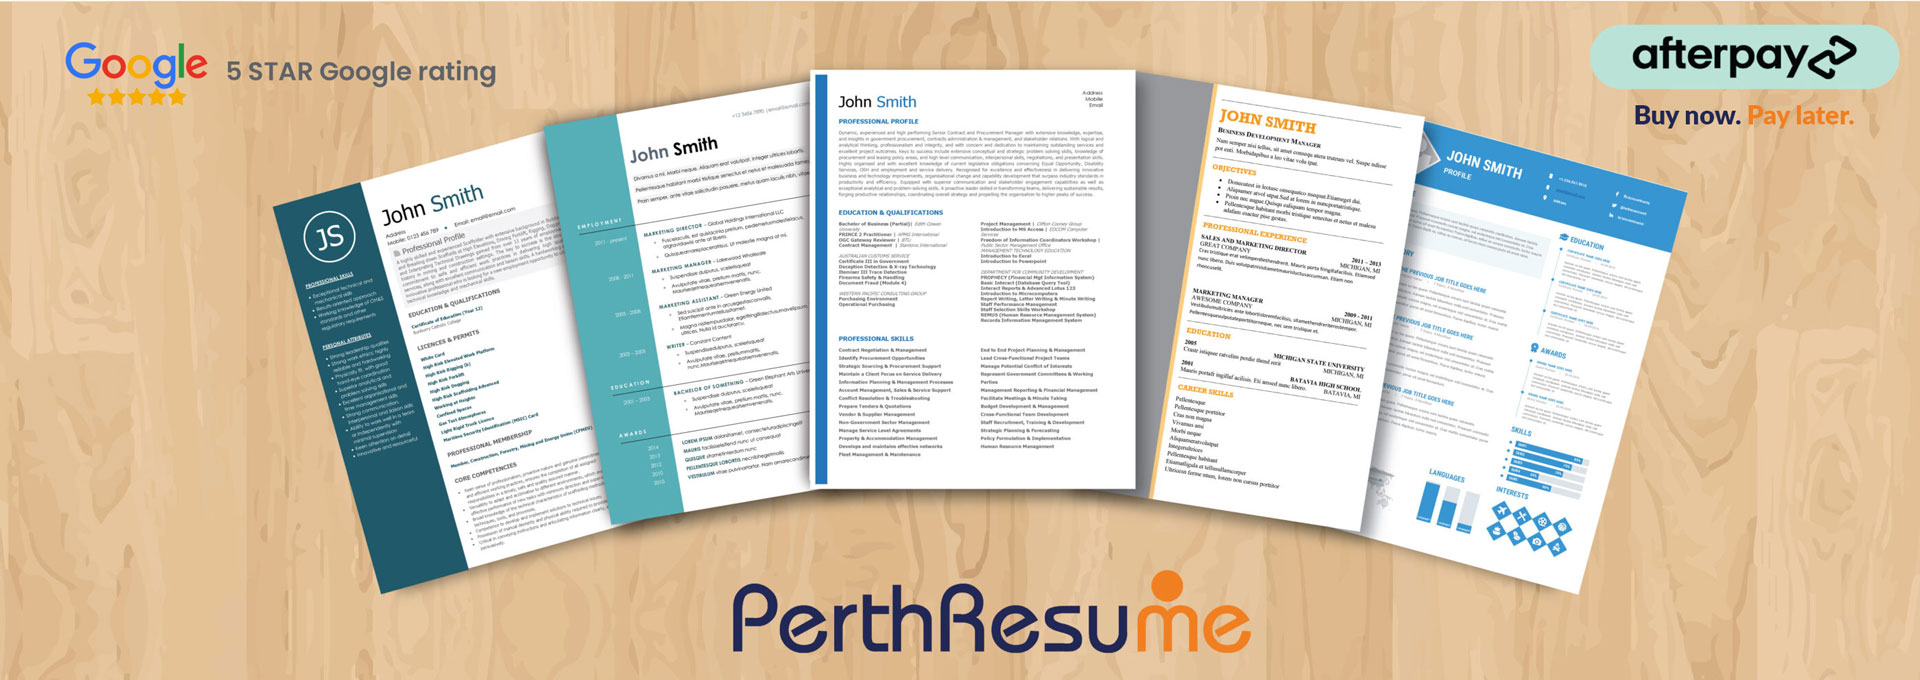 Perth Resume - Professional Resume and Cover Letter Writing Services